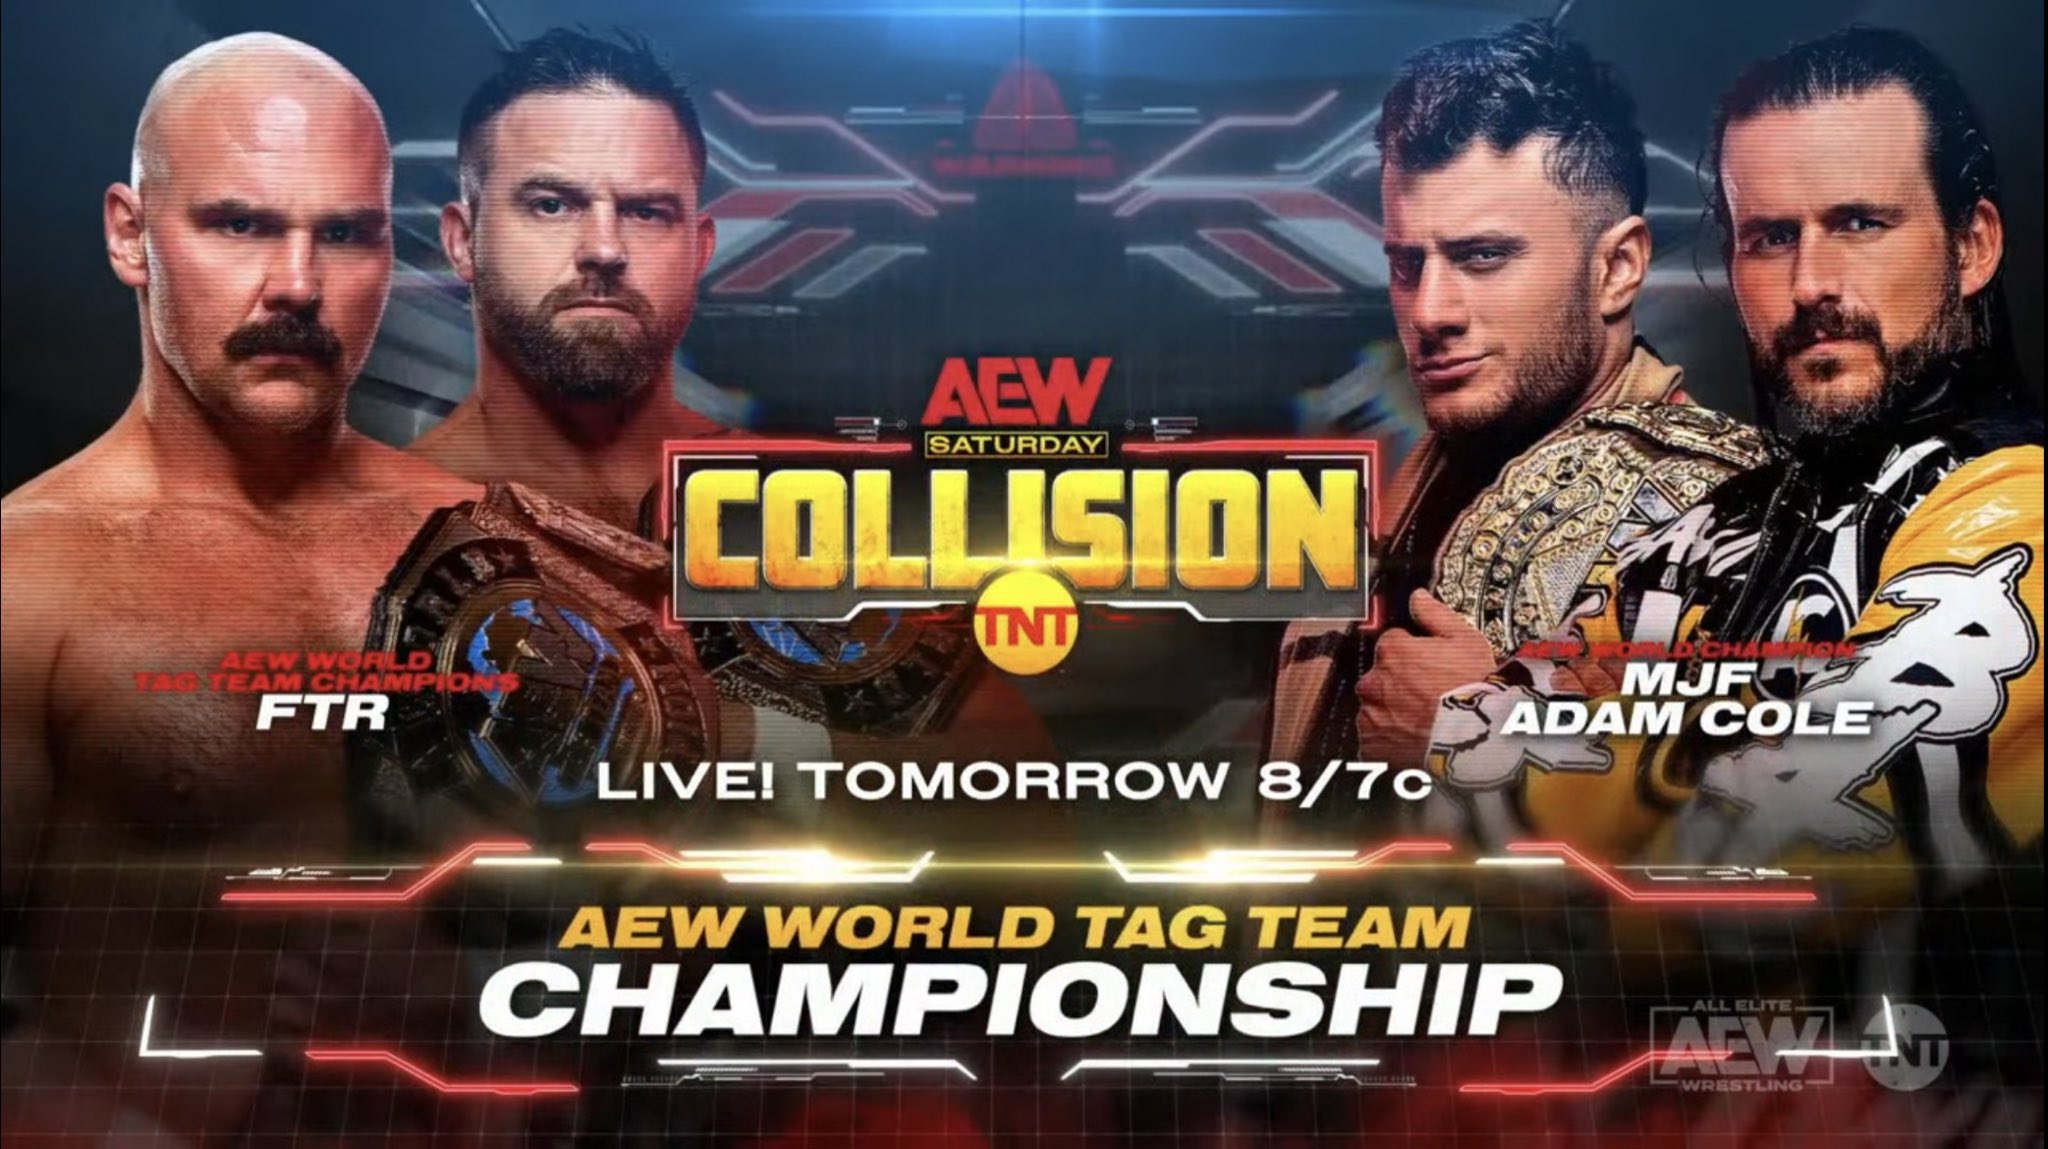 A match graphic for AEW Collision featuring FTR vs. MJF & Adam Cole.